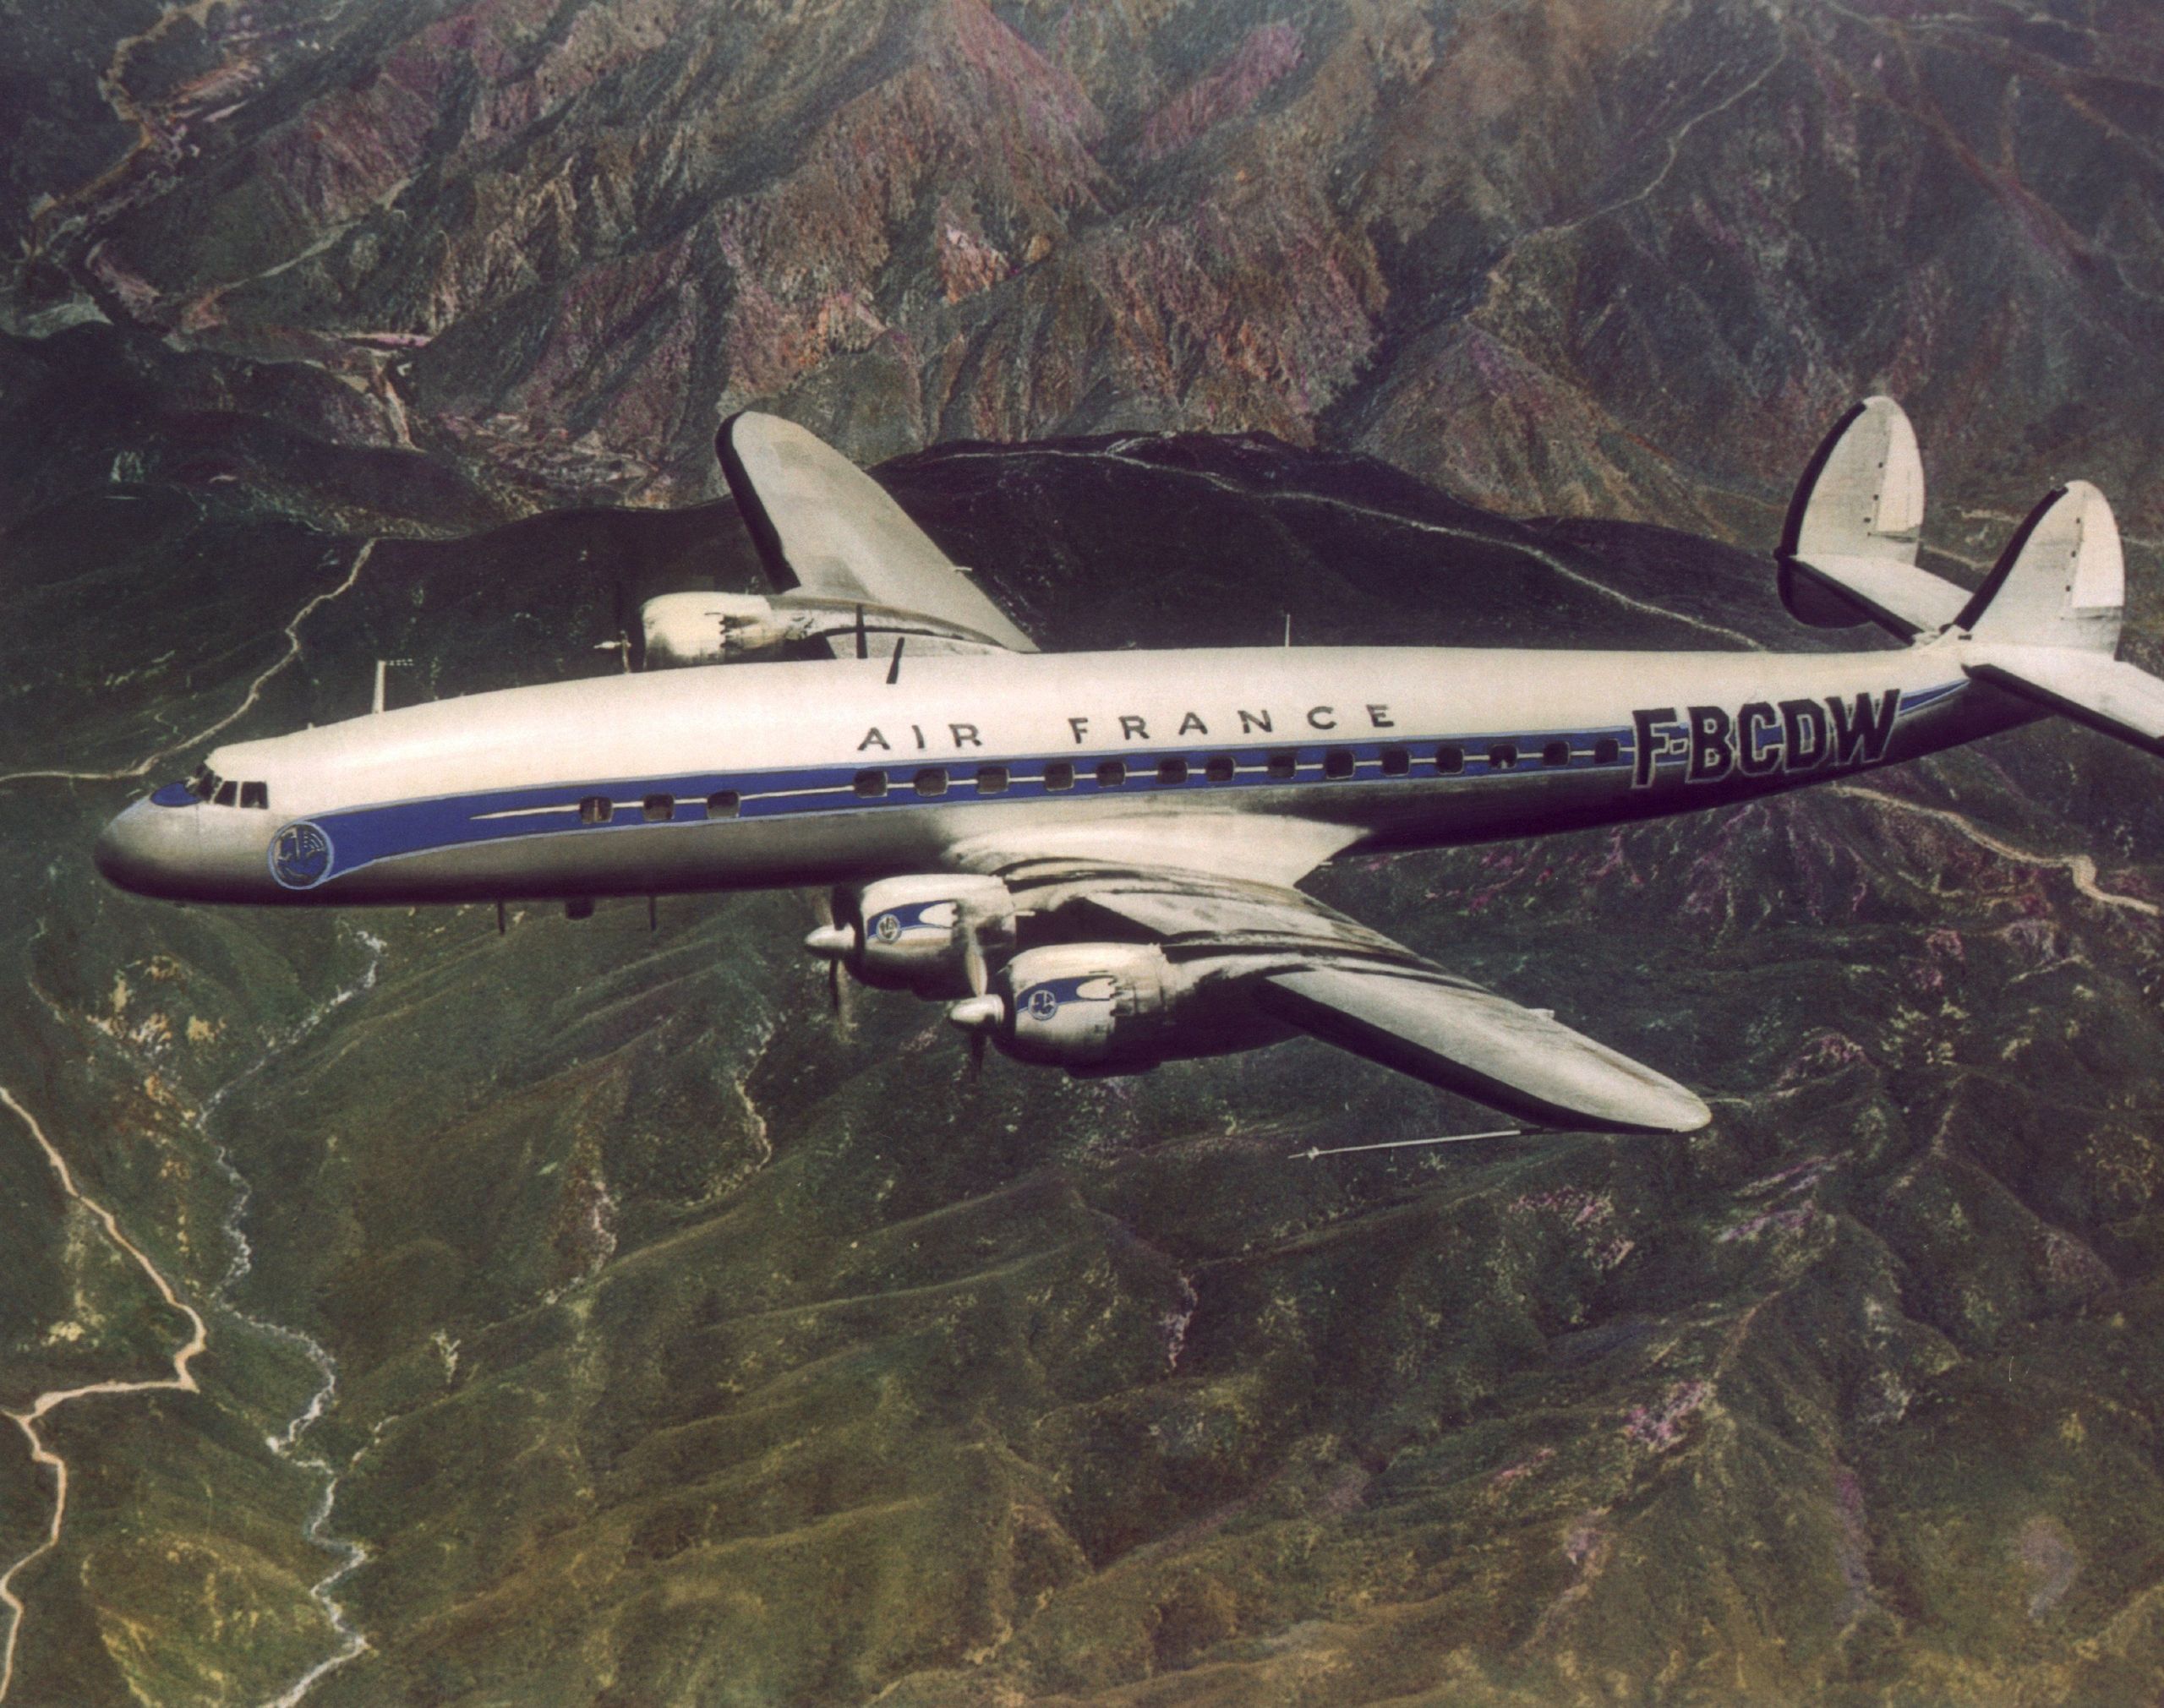 5150-miles-of-range-the-story-of-the-lockheed-l-1049-super-constellation